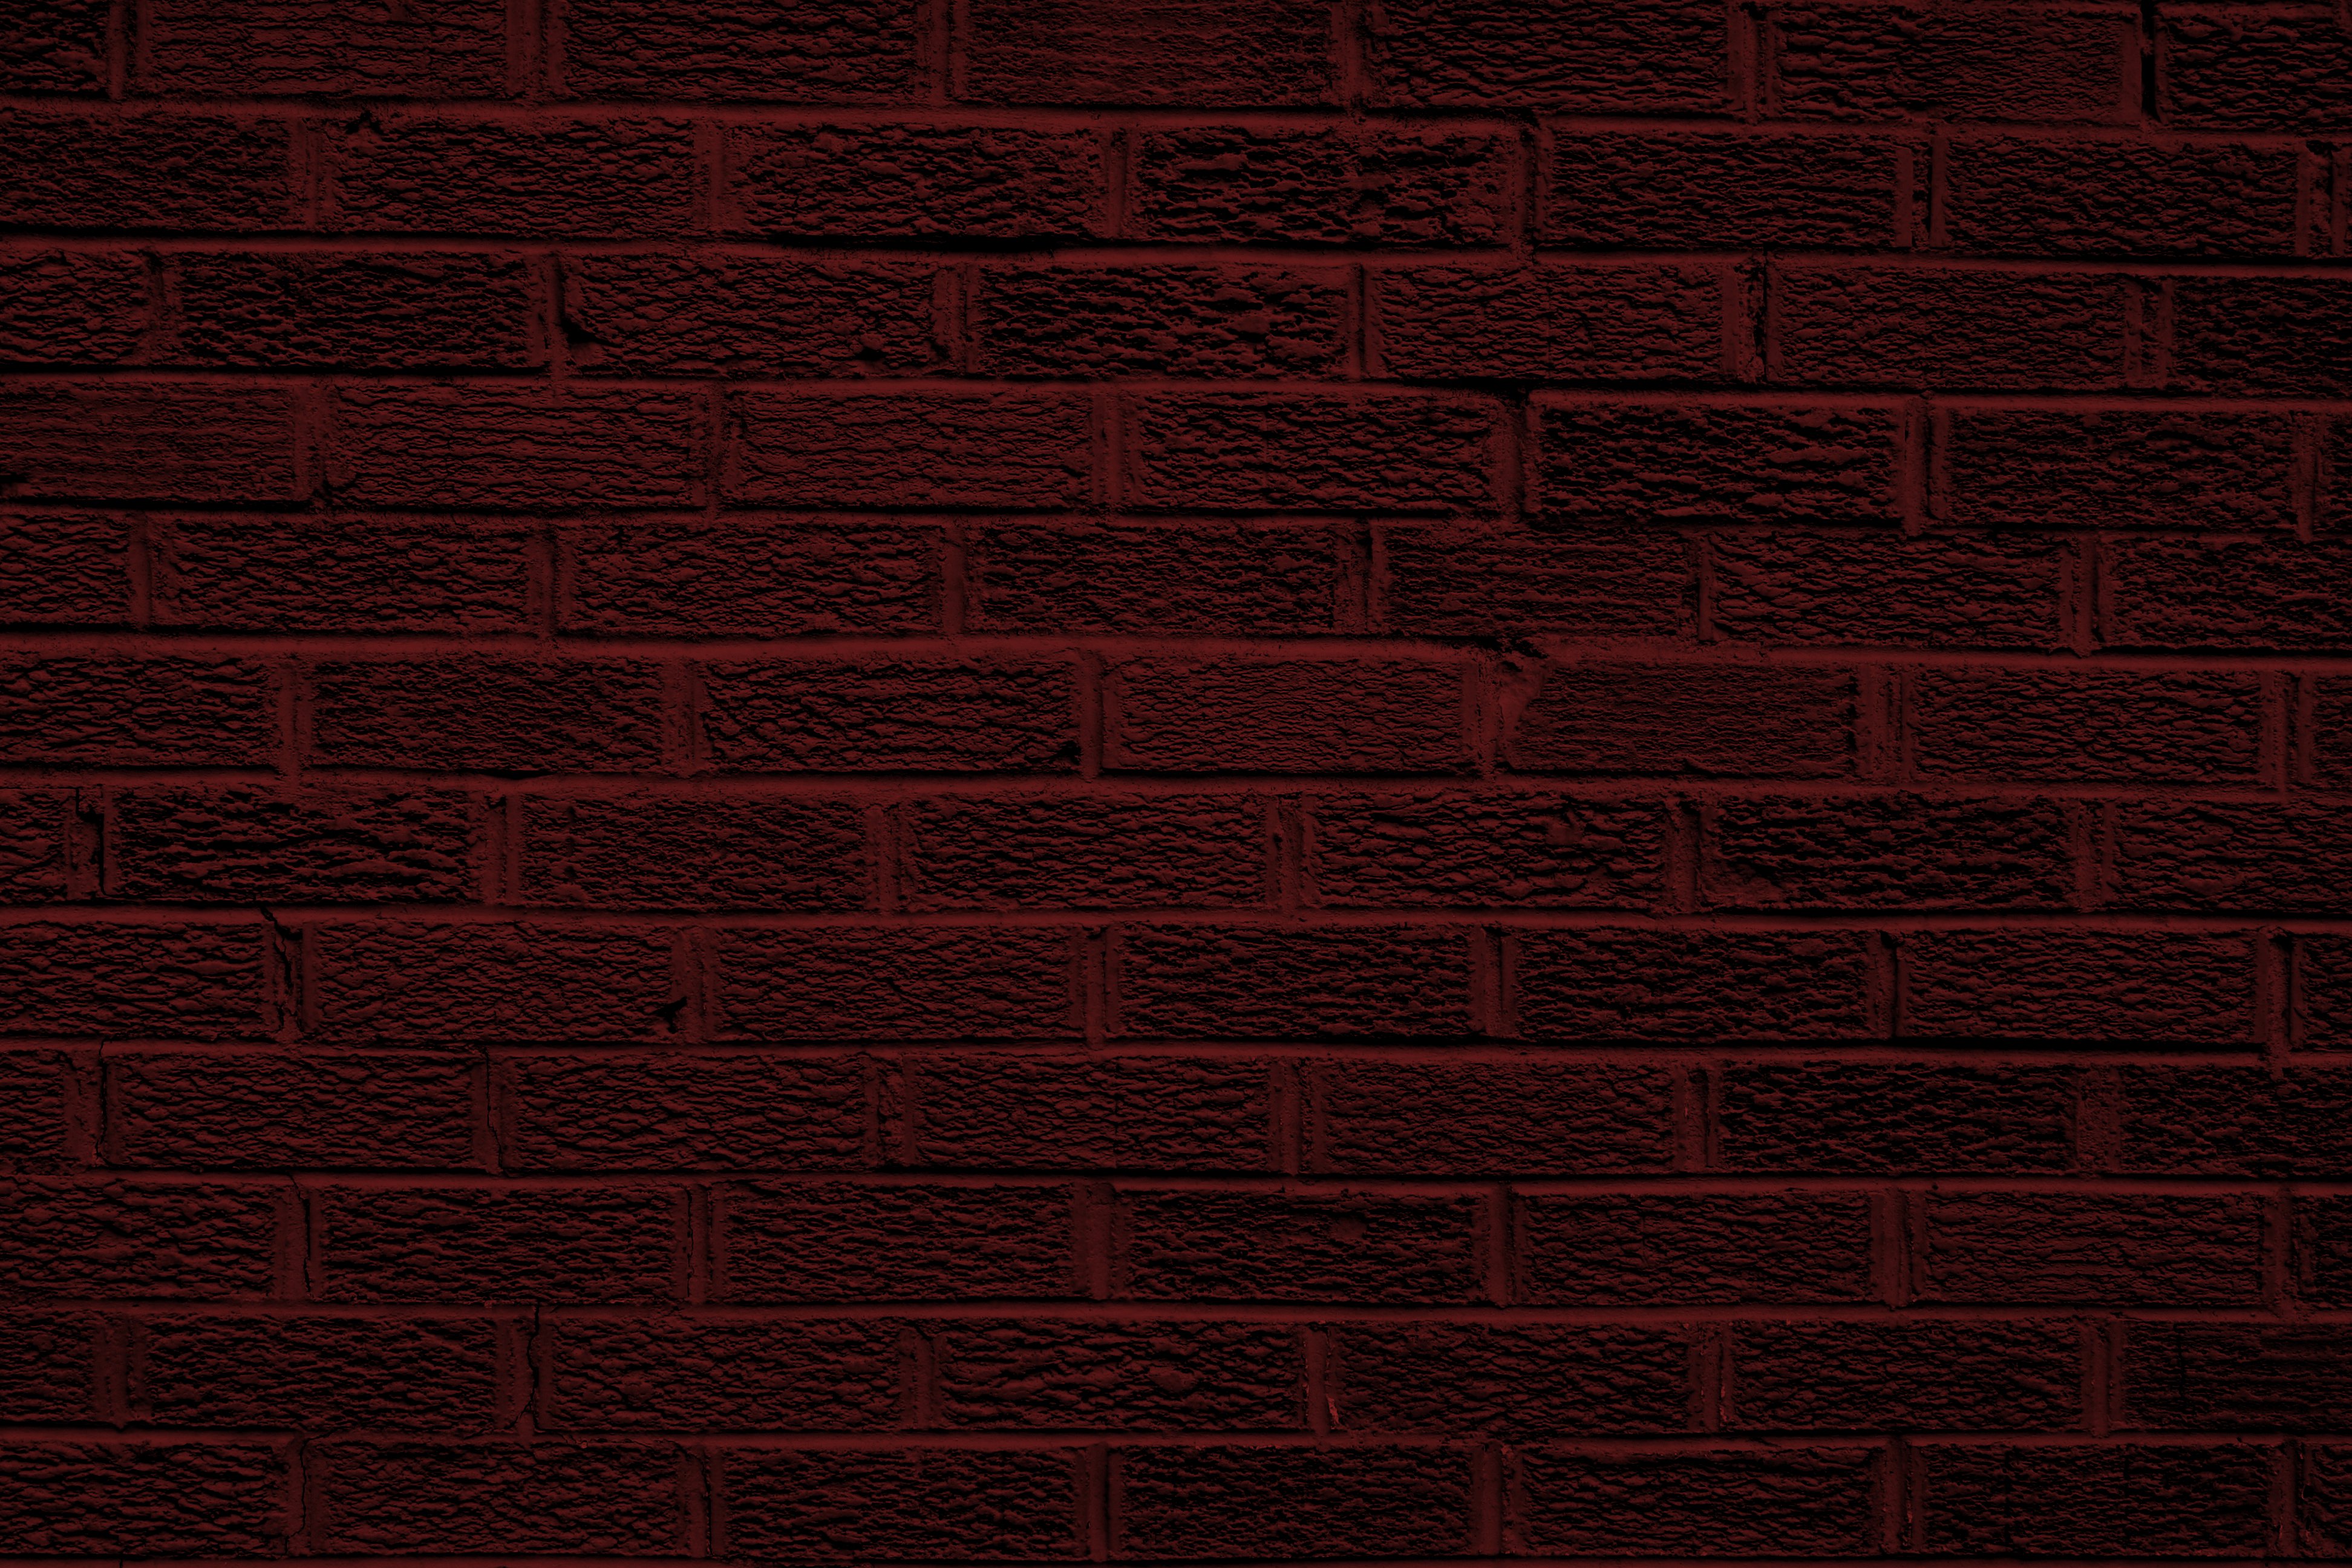 Dark Red Brick Wall Texture Picture Photograph Photos Public